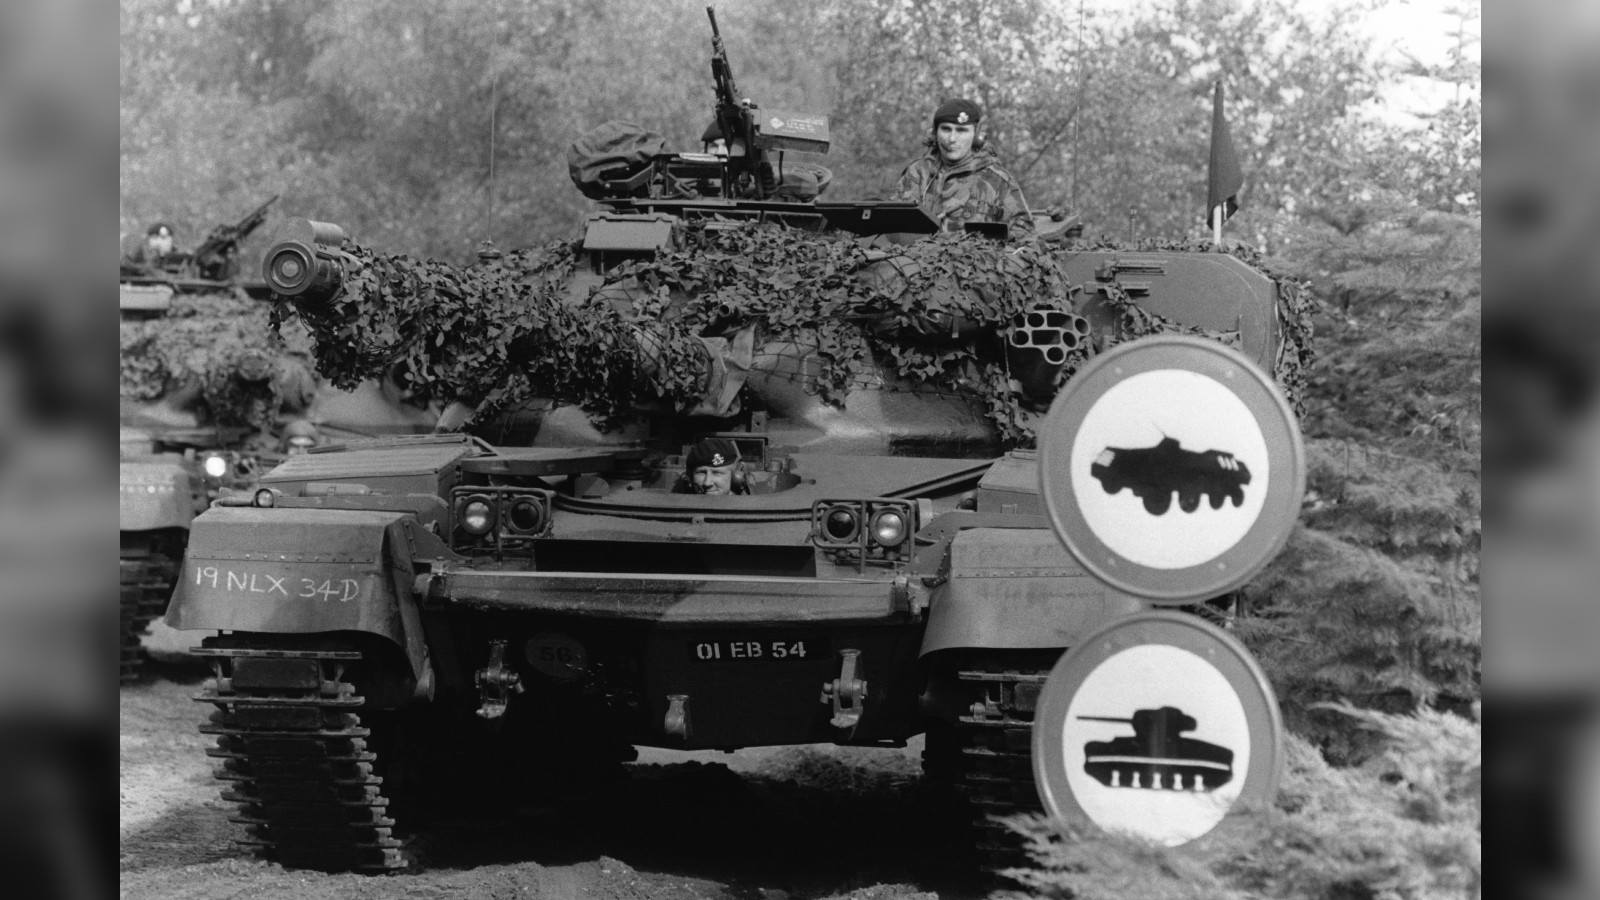 a NATO tank on exercise in 1983